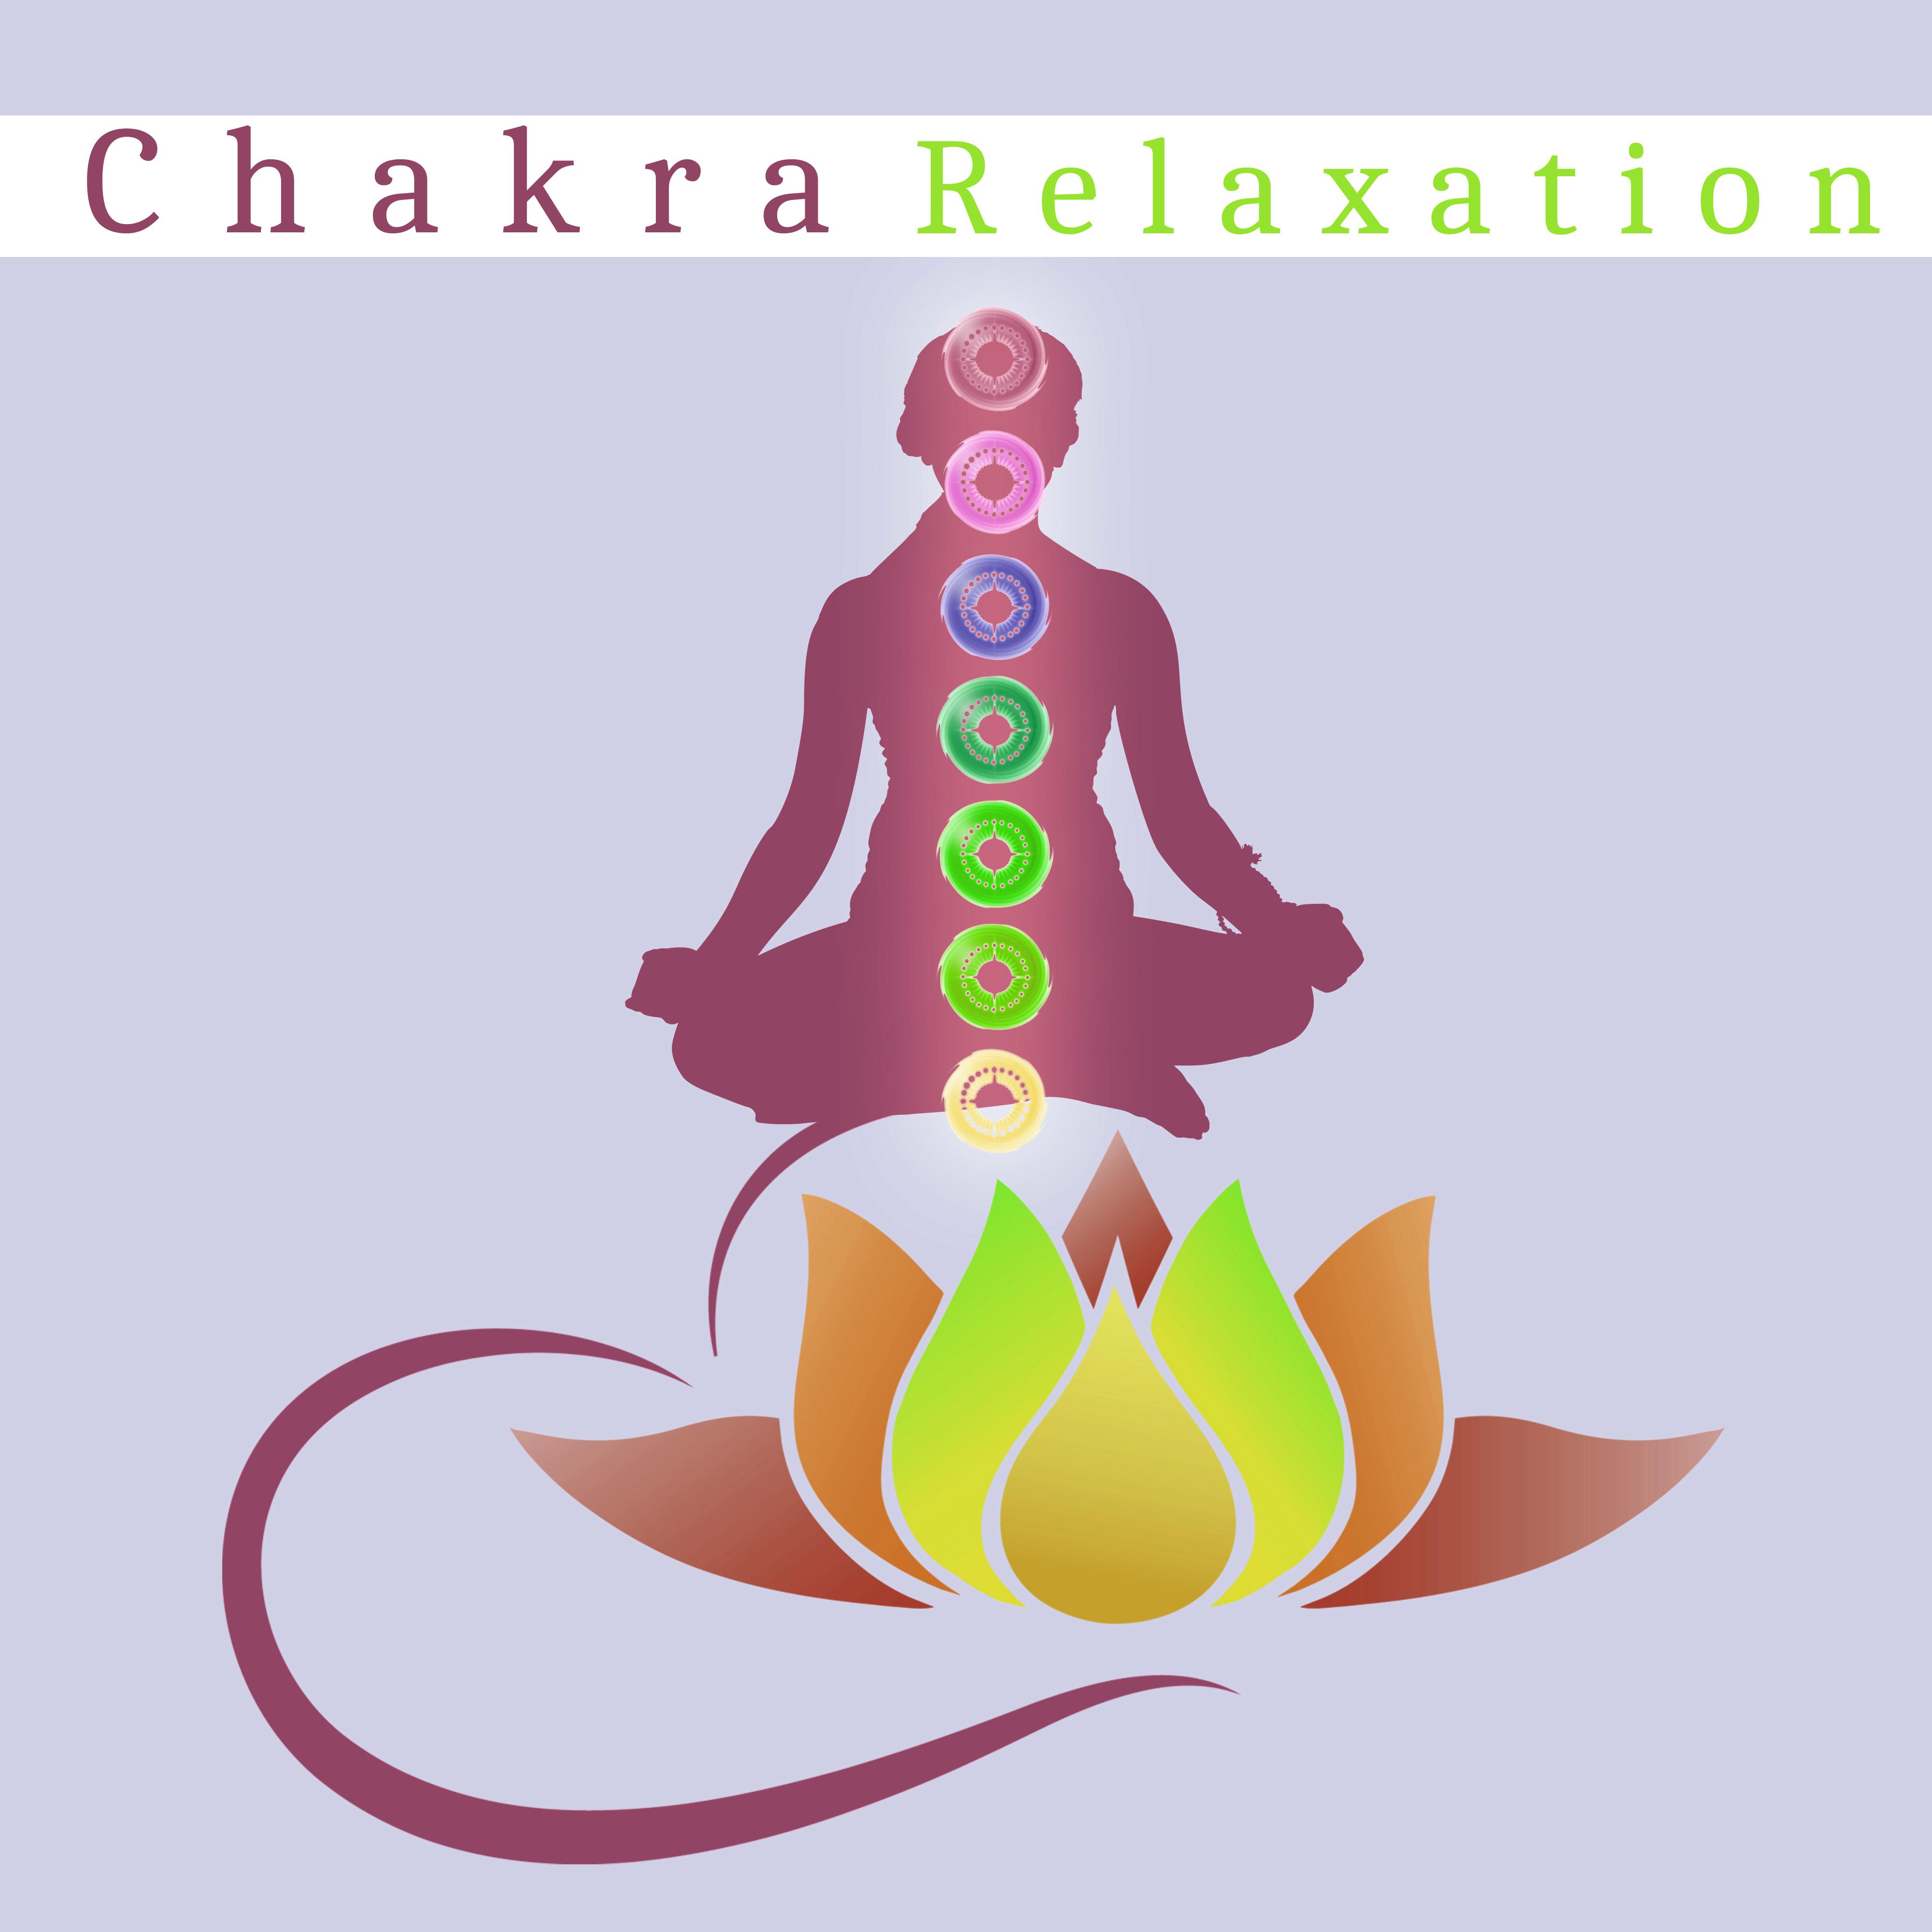 Chakra Relaxation  Yoga Music, Relief, Calm Down, Meditation Music, Peaceful Sounds, Pure Mind, Reiki